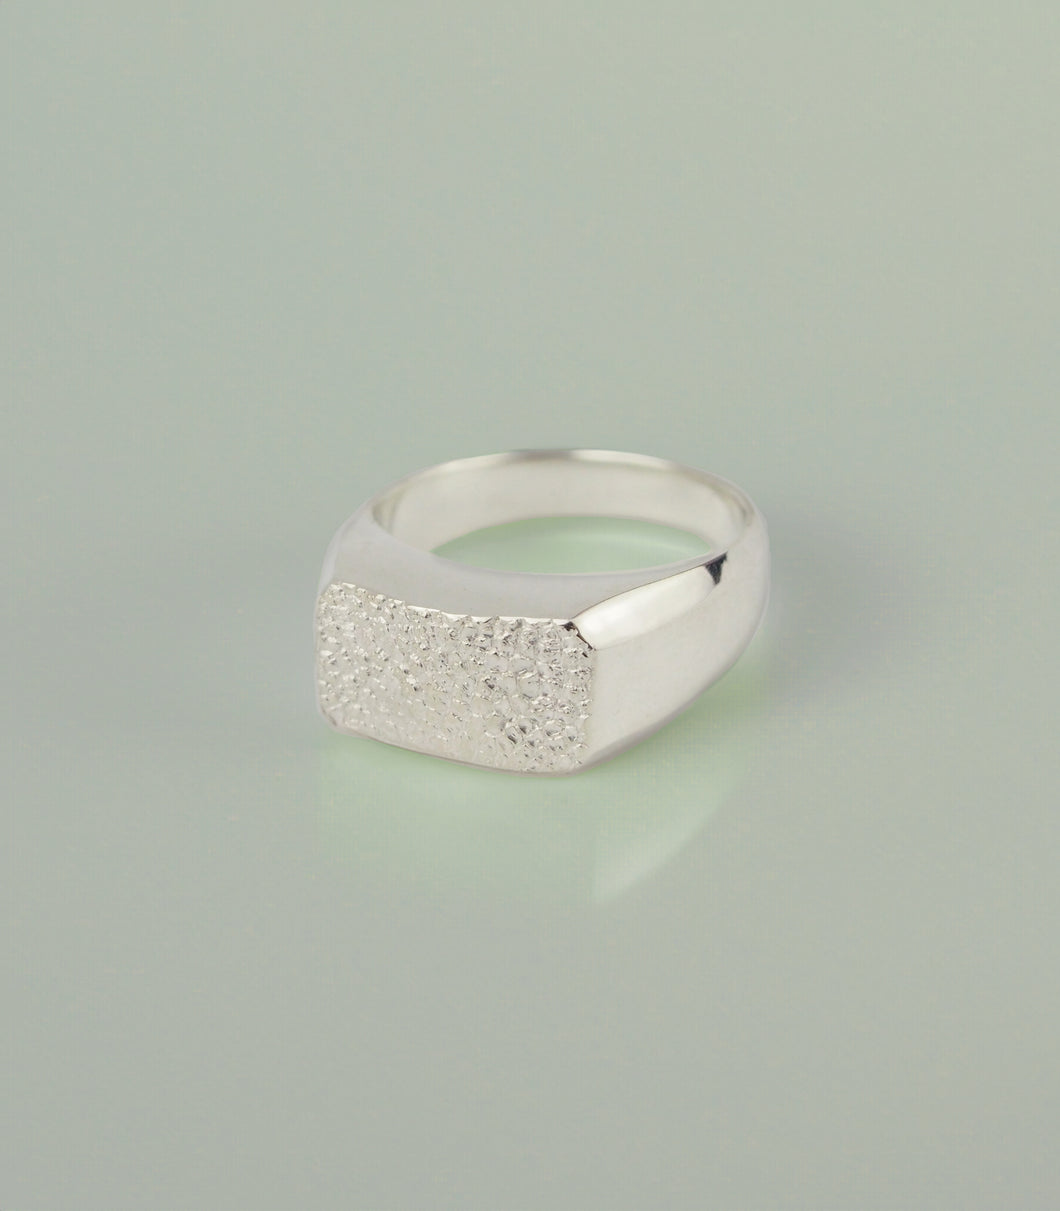 IMPRESSION RING (Silver or 9ct Gold)